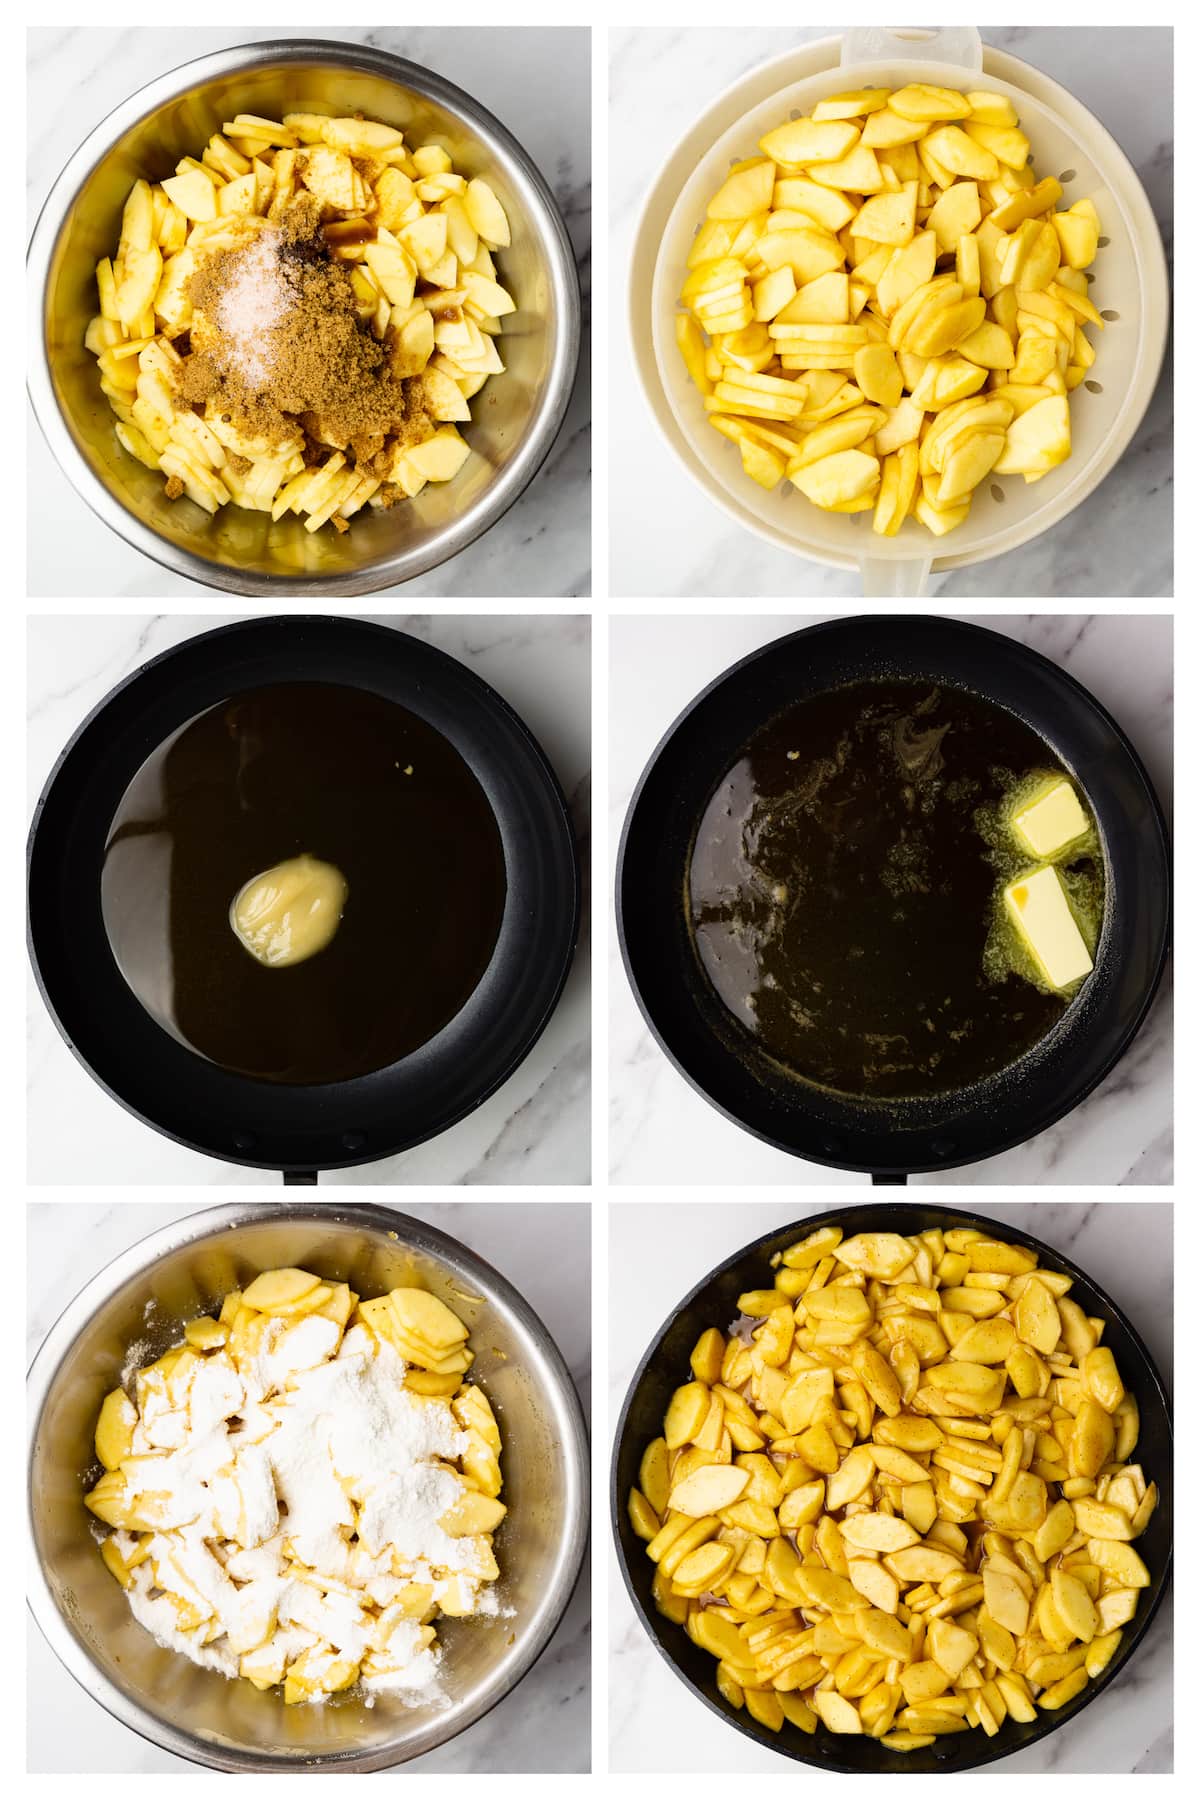 Collage image showing how to make apple pie filling.